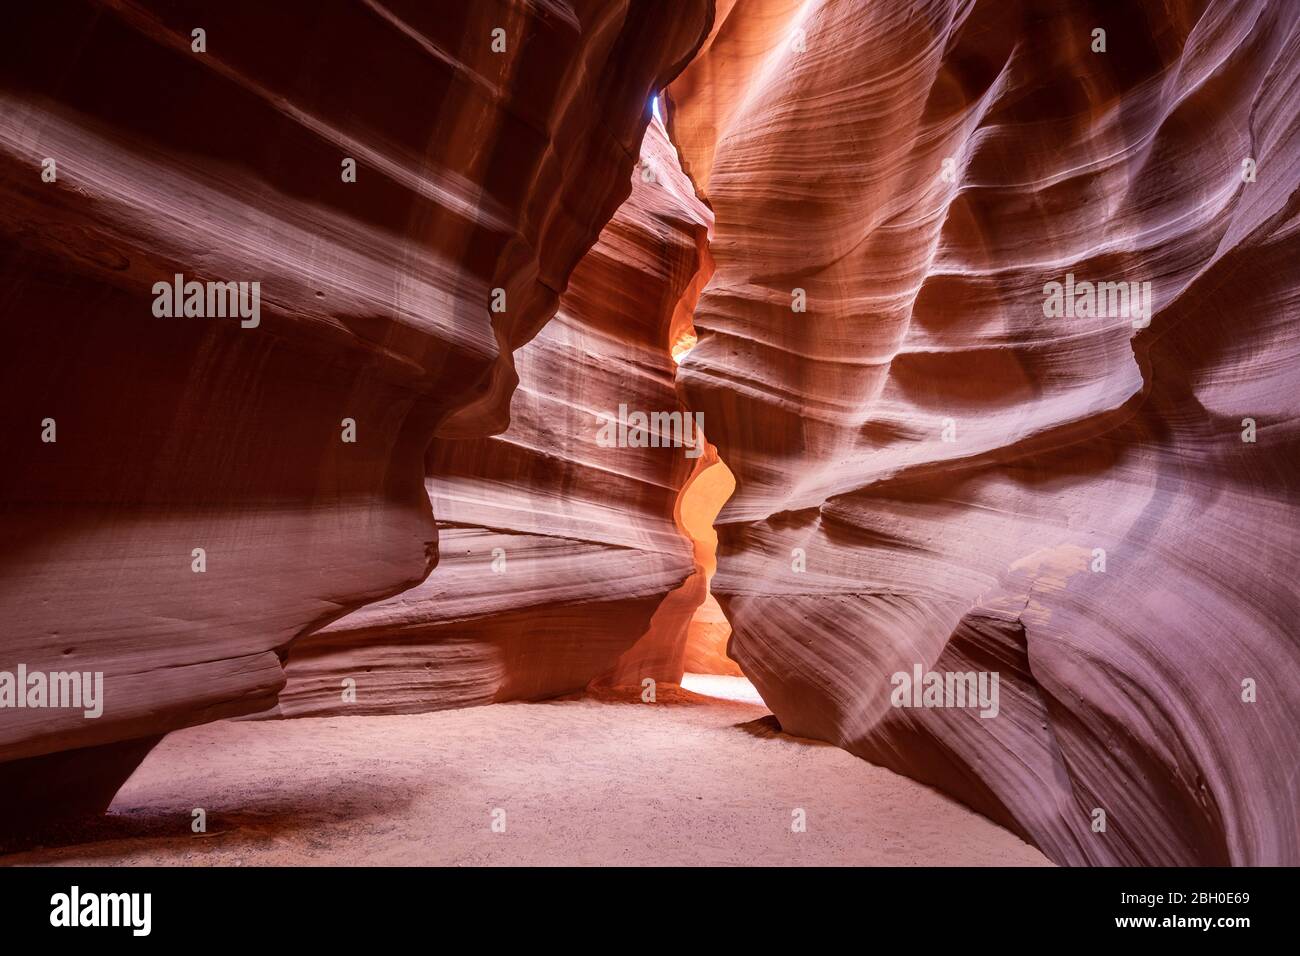 Interior of the Antelope Canyon, with red sandstone carved into curved surfaces Stock Photo